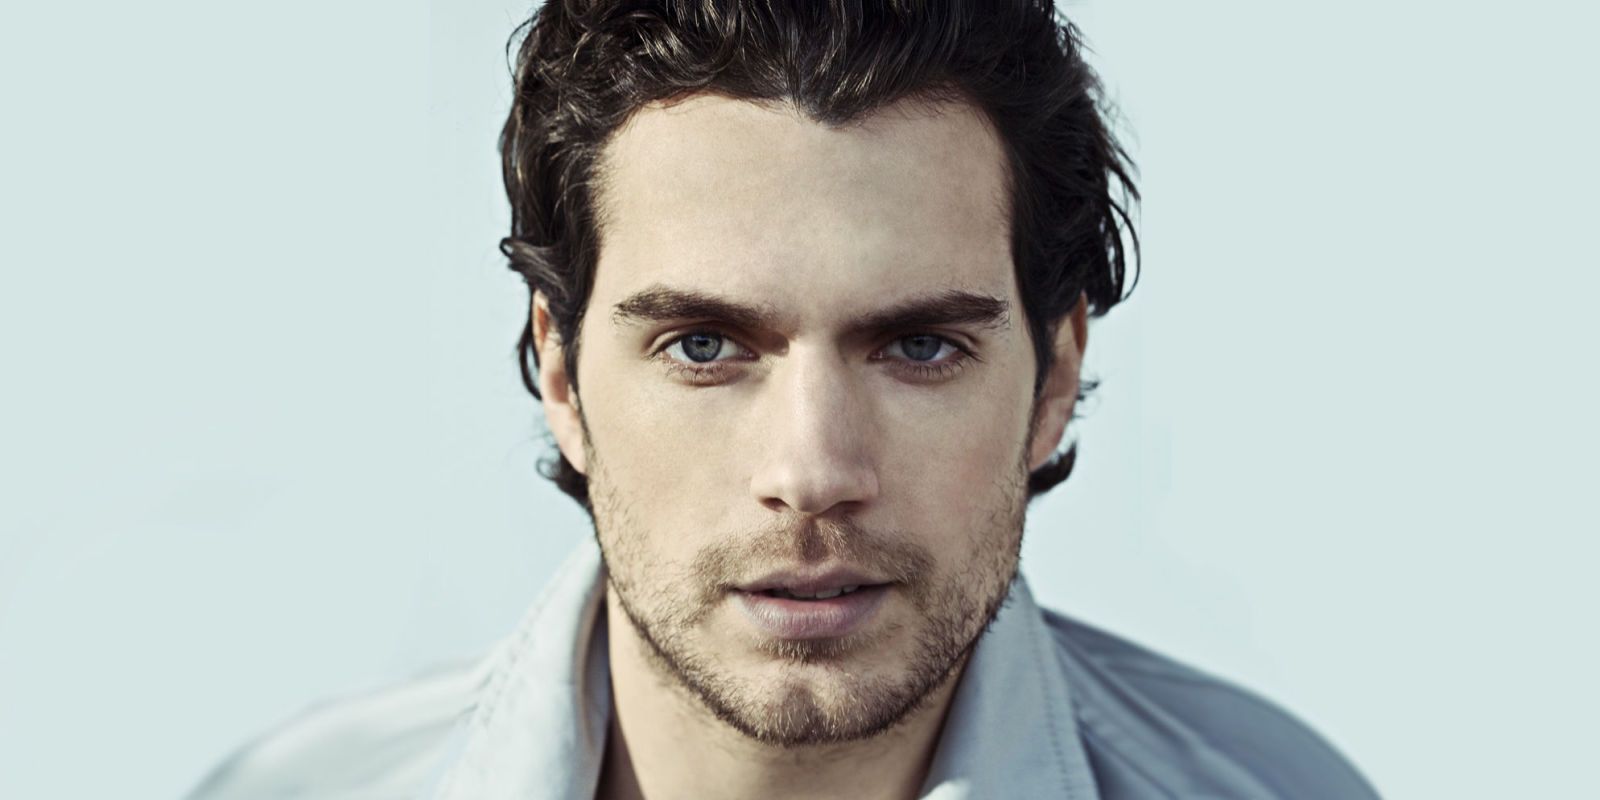 Henry Cavill Natural Wavy Hairstyle - TheHairStyler.com